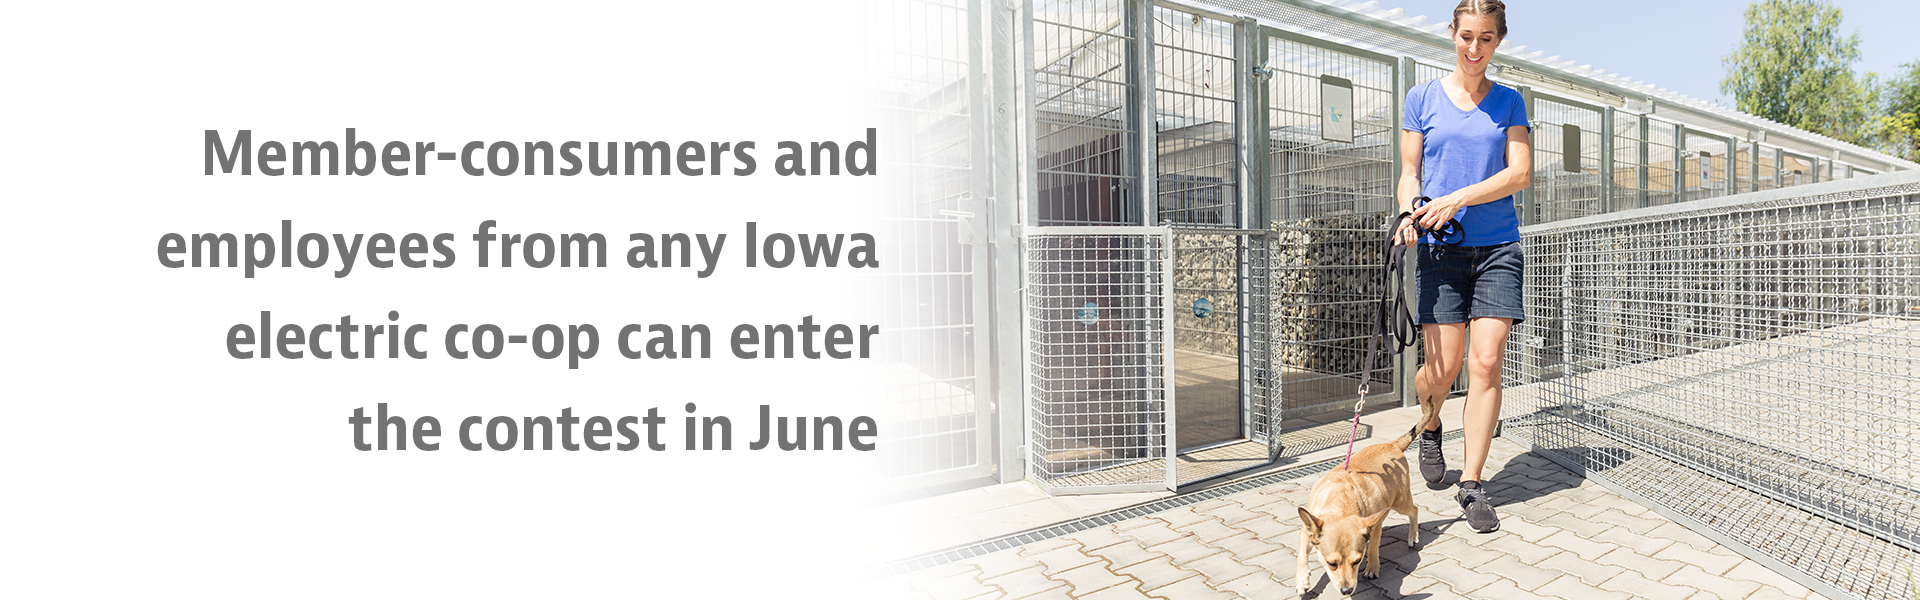 Member-consumers and employees of any Iowa electric cooperative can enter the contest in June